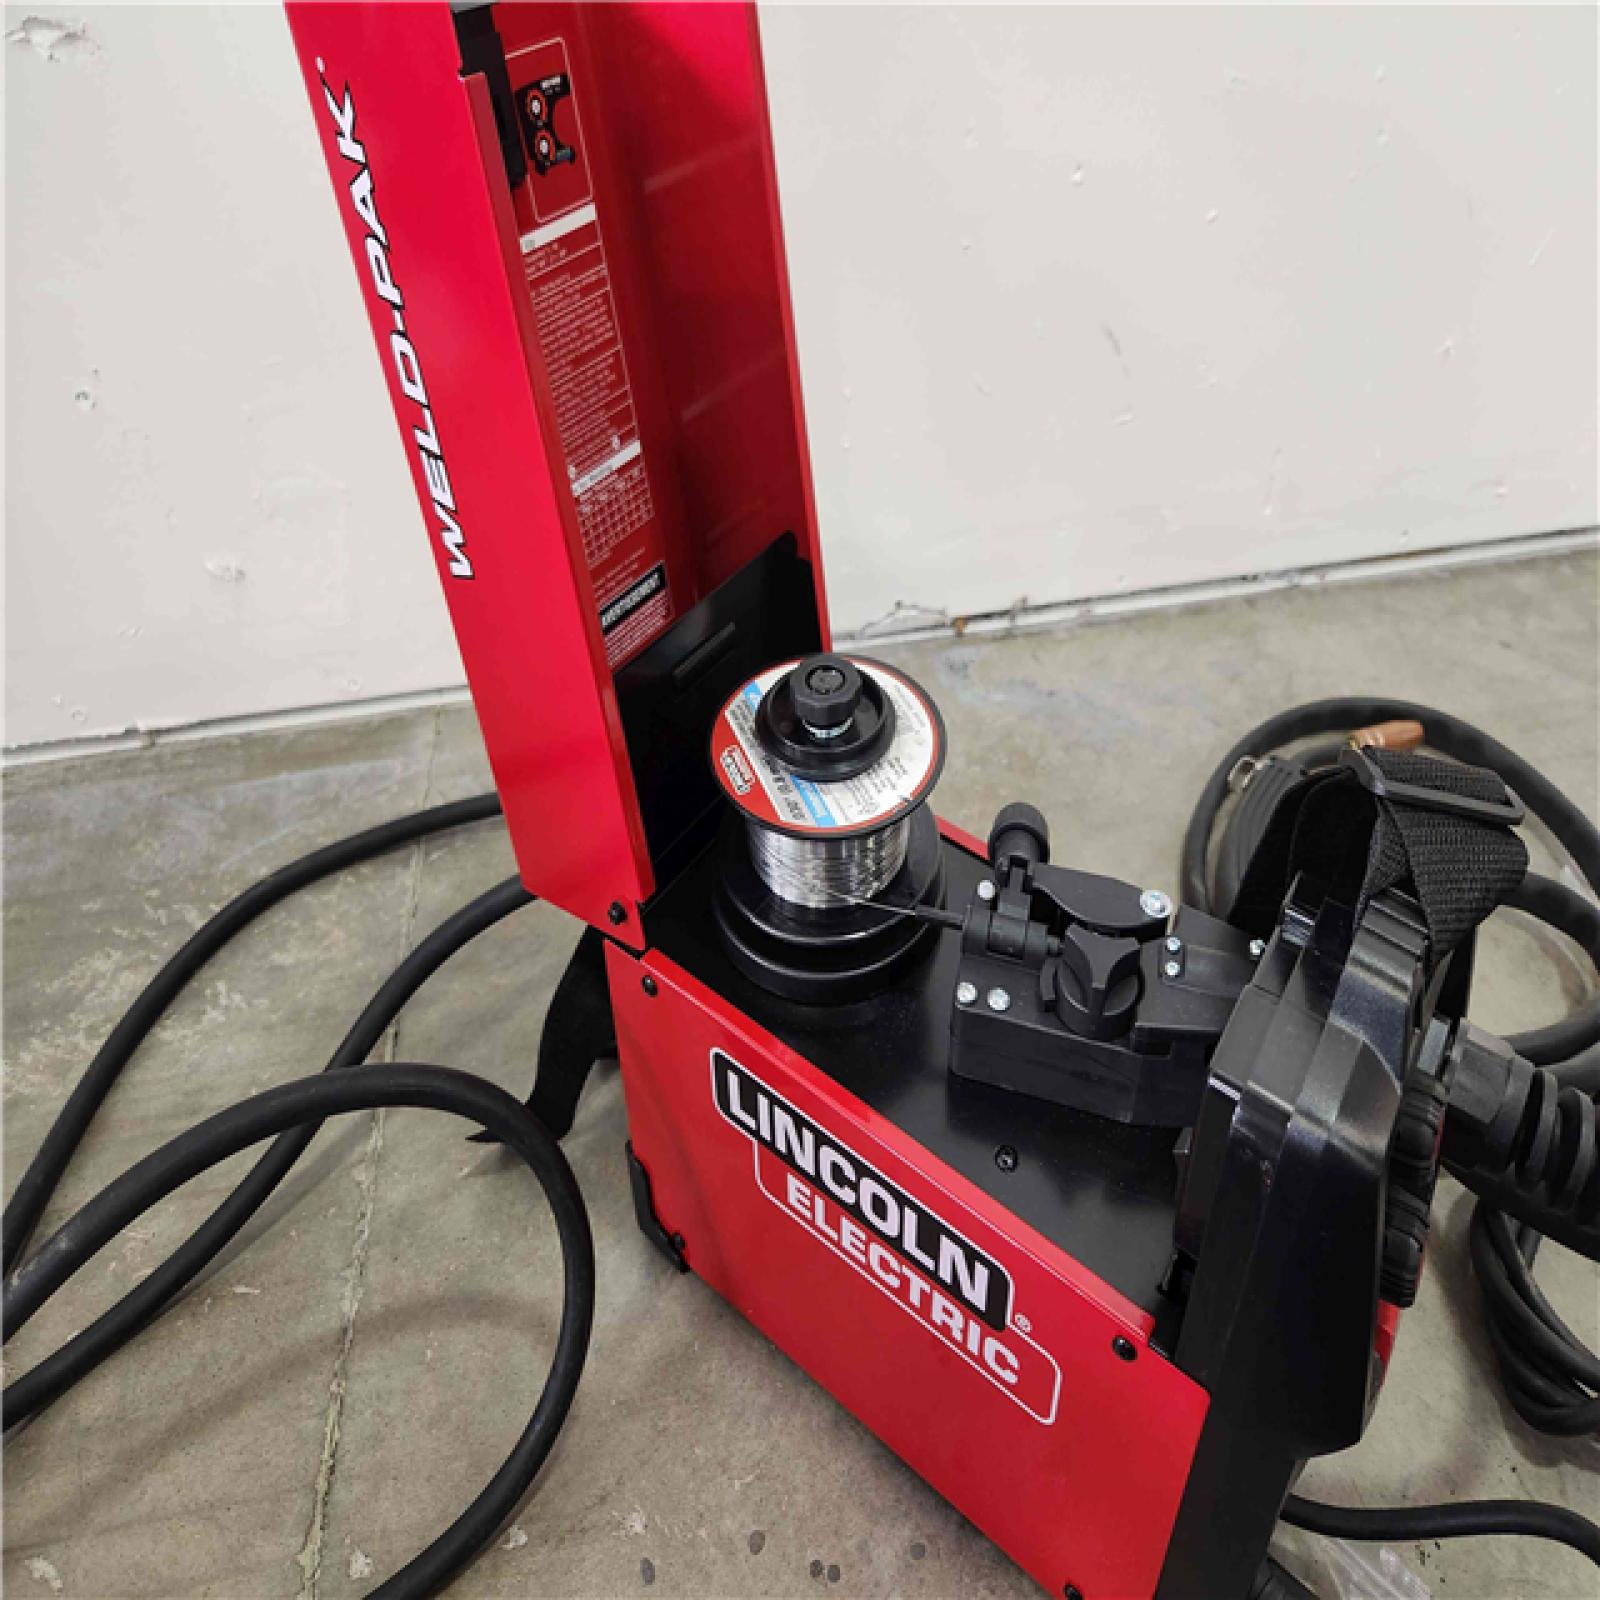 Phoenix Location NEW Lincoln Electric WELD-PAK 90i MIG and Flux-Cored Wire Feeder Welder with Gas Regulator 008